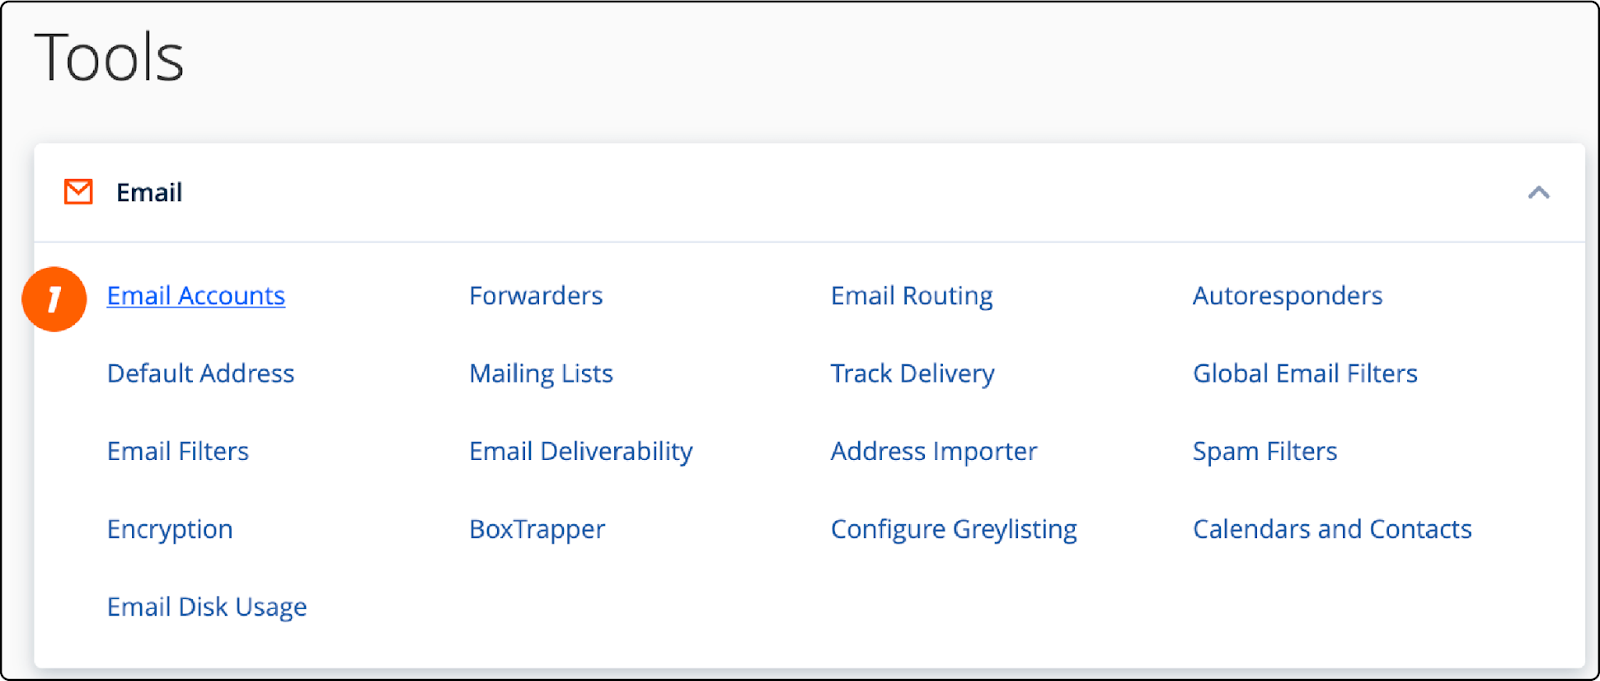 Navigate to email Accounts section